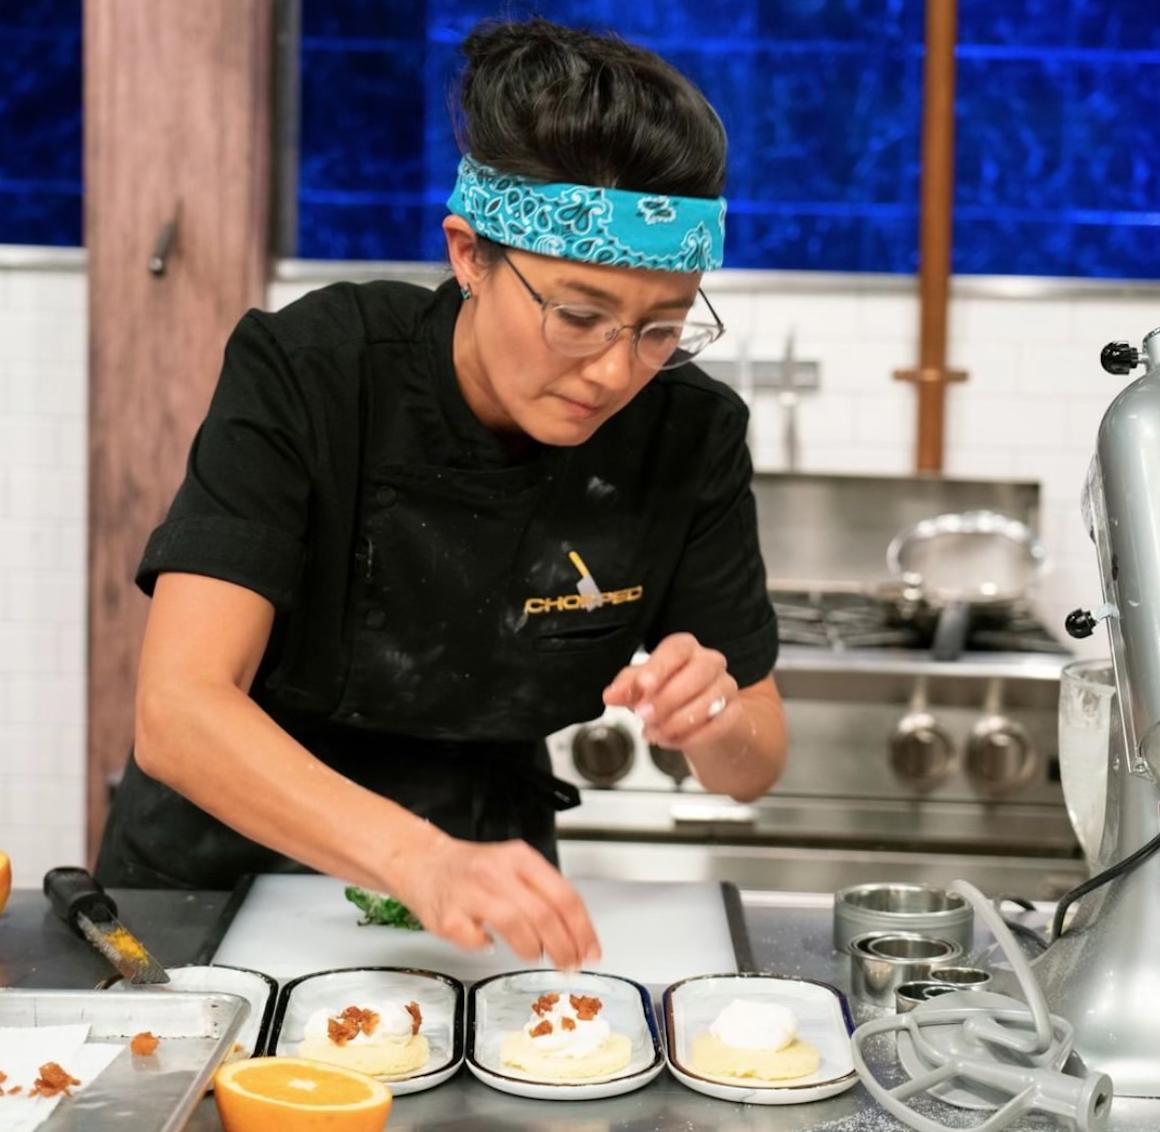 Evanston native wins Food Network’s ‘Chopped’